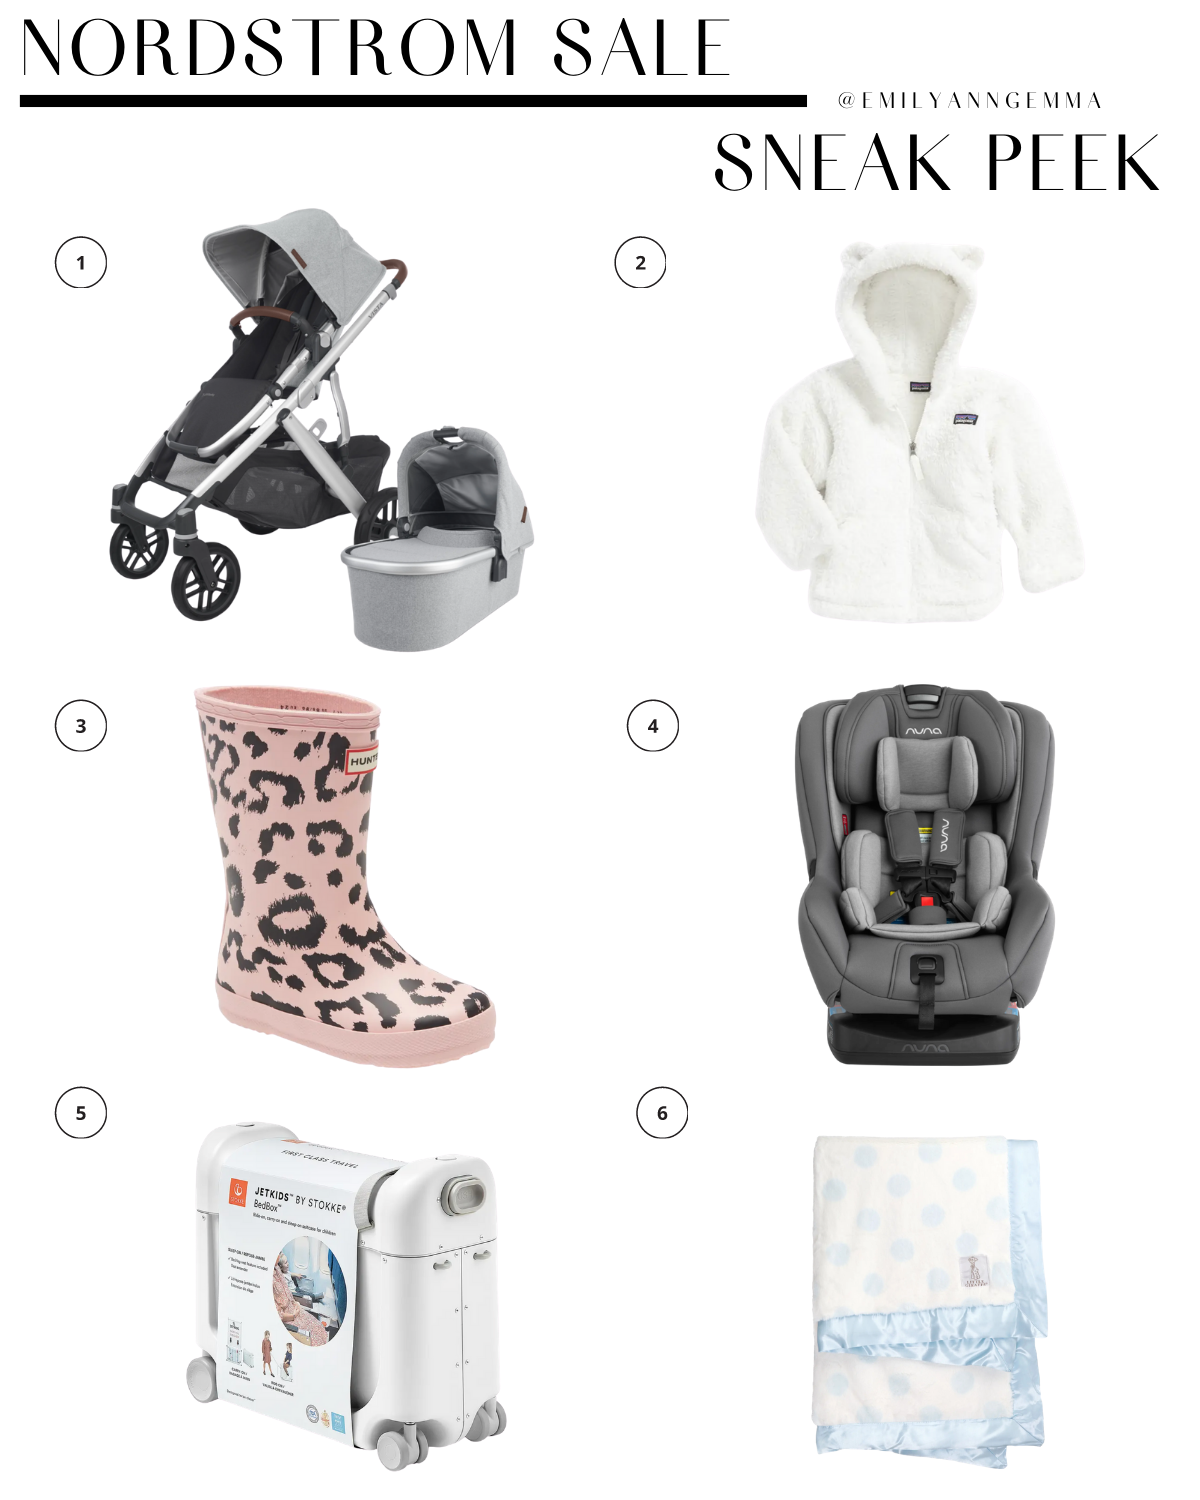 nsale 2020, nordstrom anniversary sale 2020, uppababy stroller Nordstorm sale, NUNA carseat Nordstrom sale, must have blog posts nordstrom sale 2020, Emily Ann Gemma, the sweetest thing blog | Nordstrom Anniversary Sale by popular US fashion blog, The Sweetest Thing: image of a Nordstrom UPPA BABY Vista V2 Stella Stroller with Bassinet, PATAGONIA Furry Friends Fleece Hoodie, HUNTER BOOTS, NUNA RAVA™ Flame Retardant Free Convertible Car Seat, STOKKE Jetkids Suitcase, LITTLE GIRAFFE Luxe™ Dream Dot Faux Fur Baby Blanket.